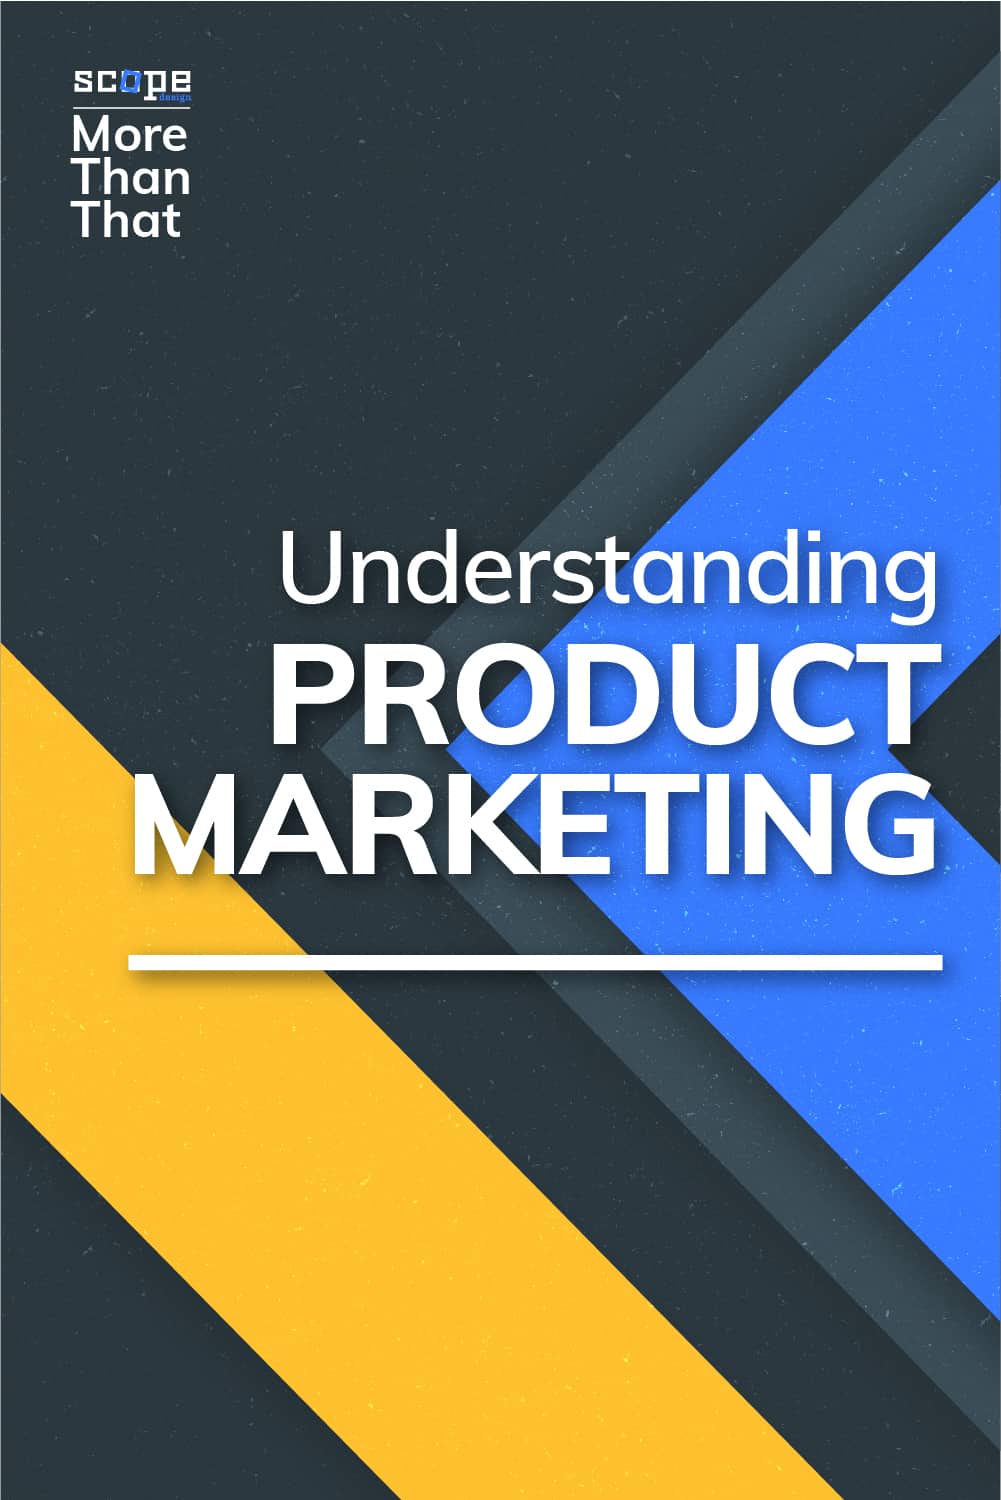 For this month's More Than That Series, we'll be talking about Understanding Product Marketing. Read on because... It's so much more than that! via @scopedesign